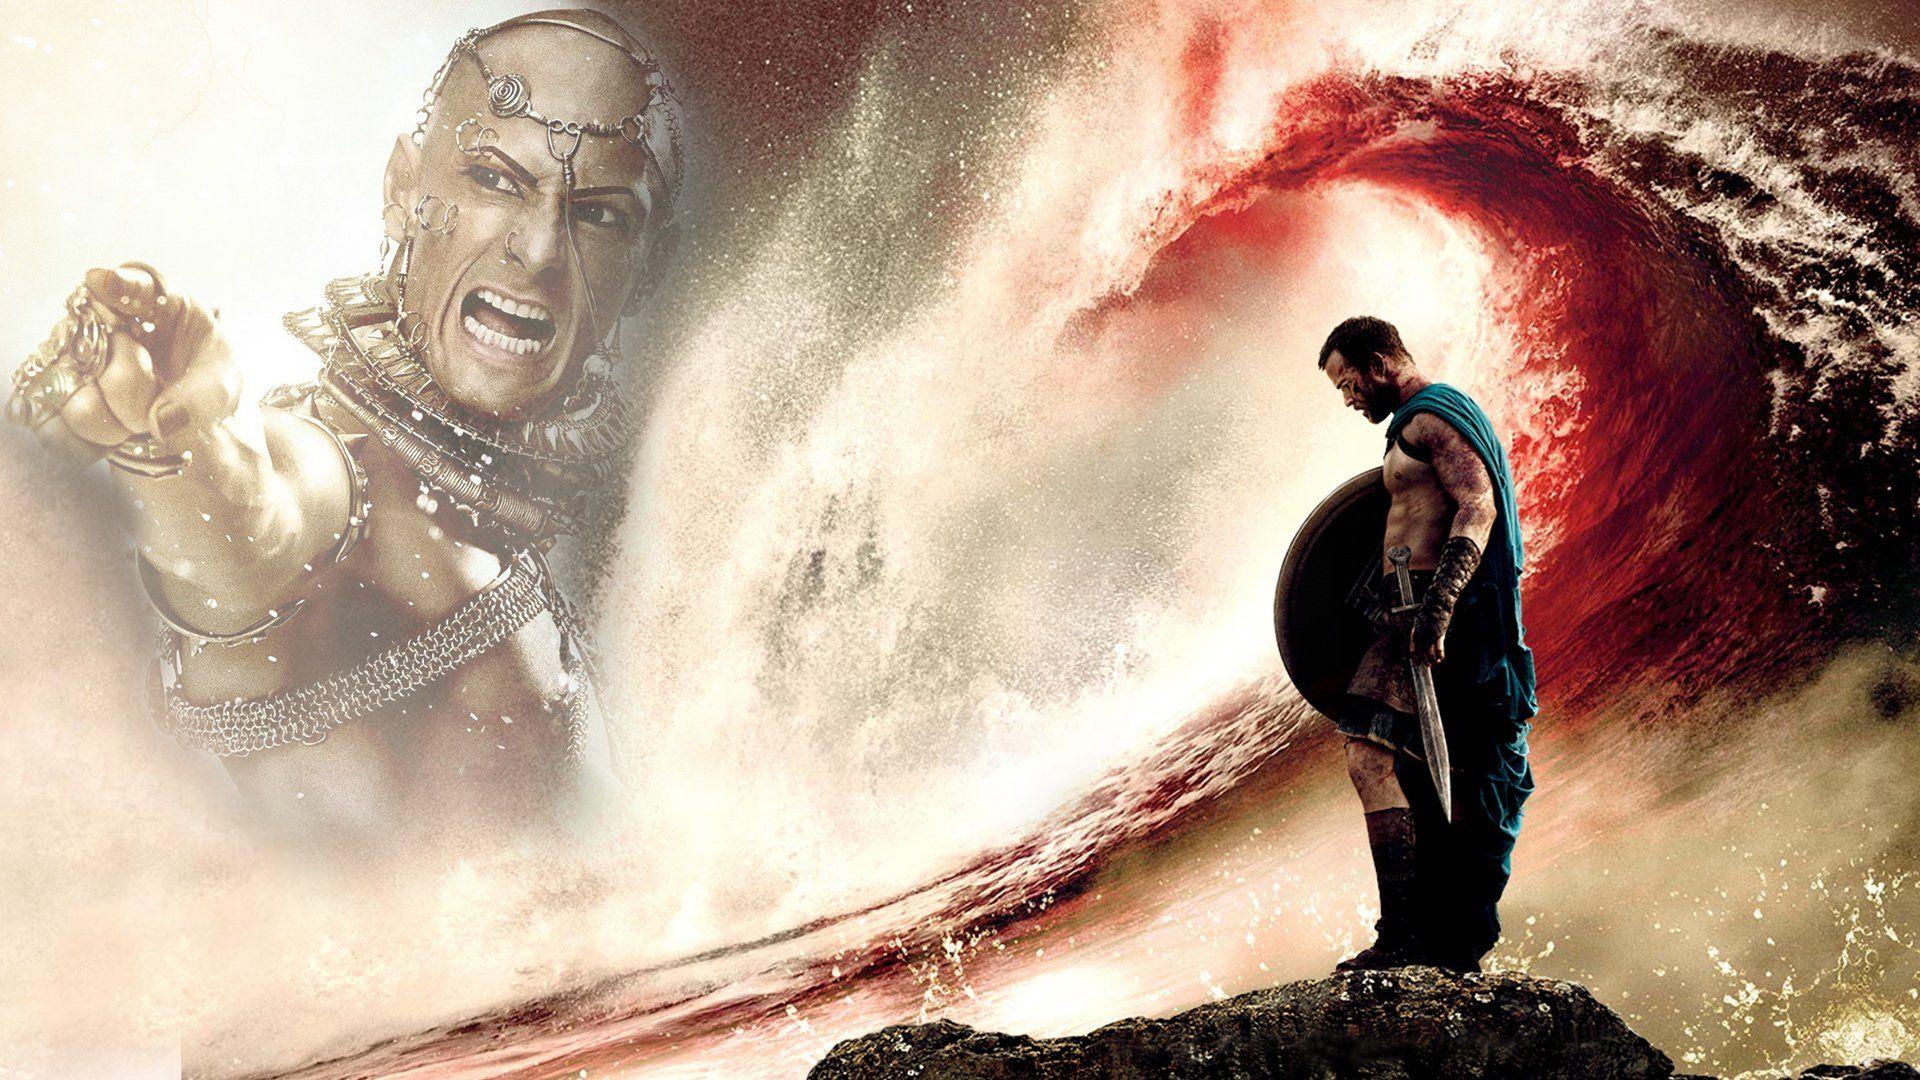 300 rise of an empire movie back drops